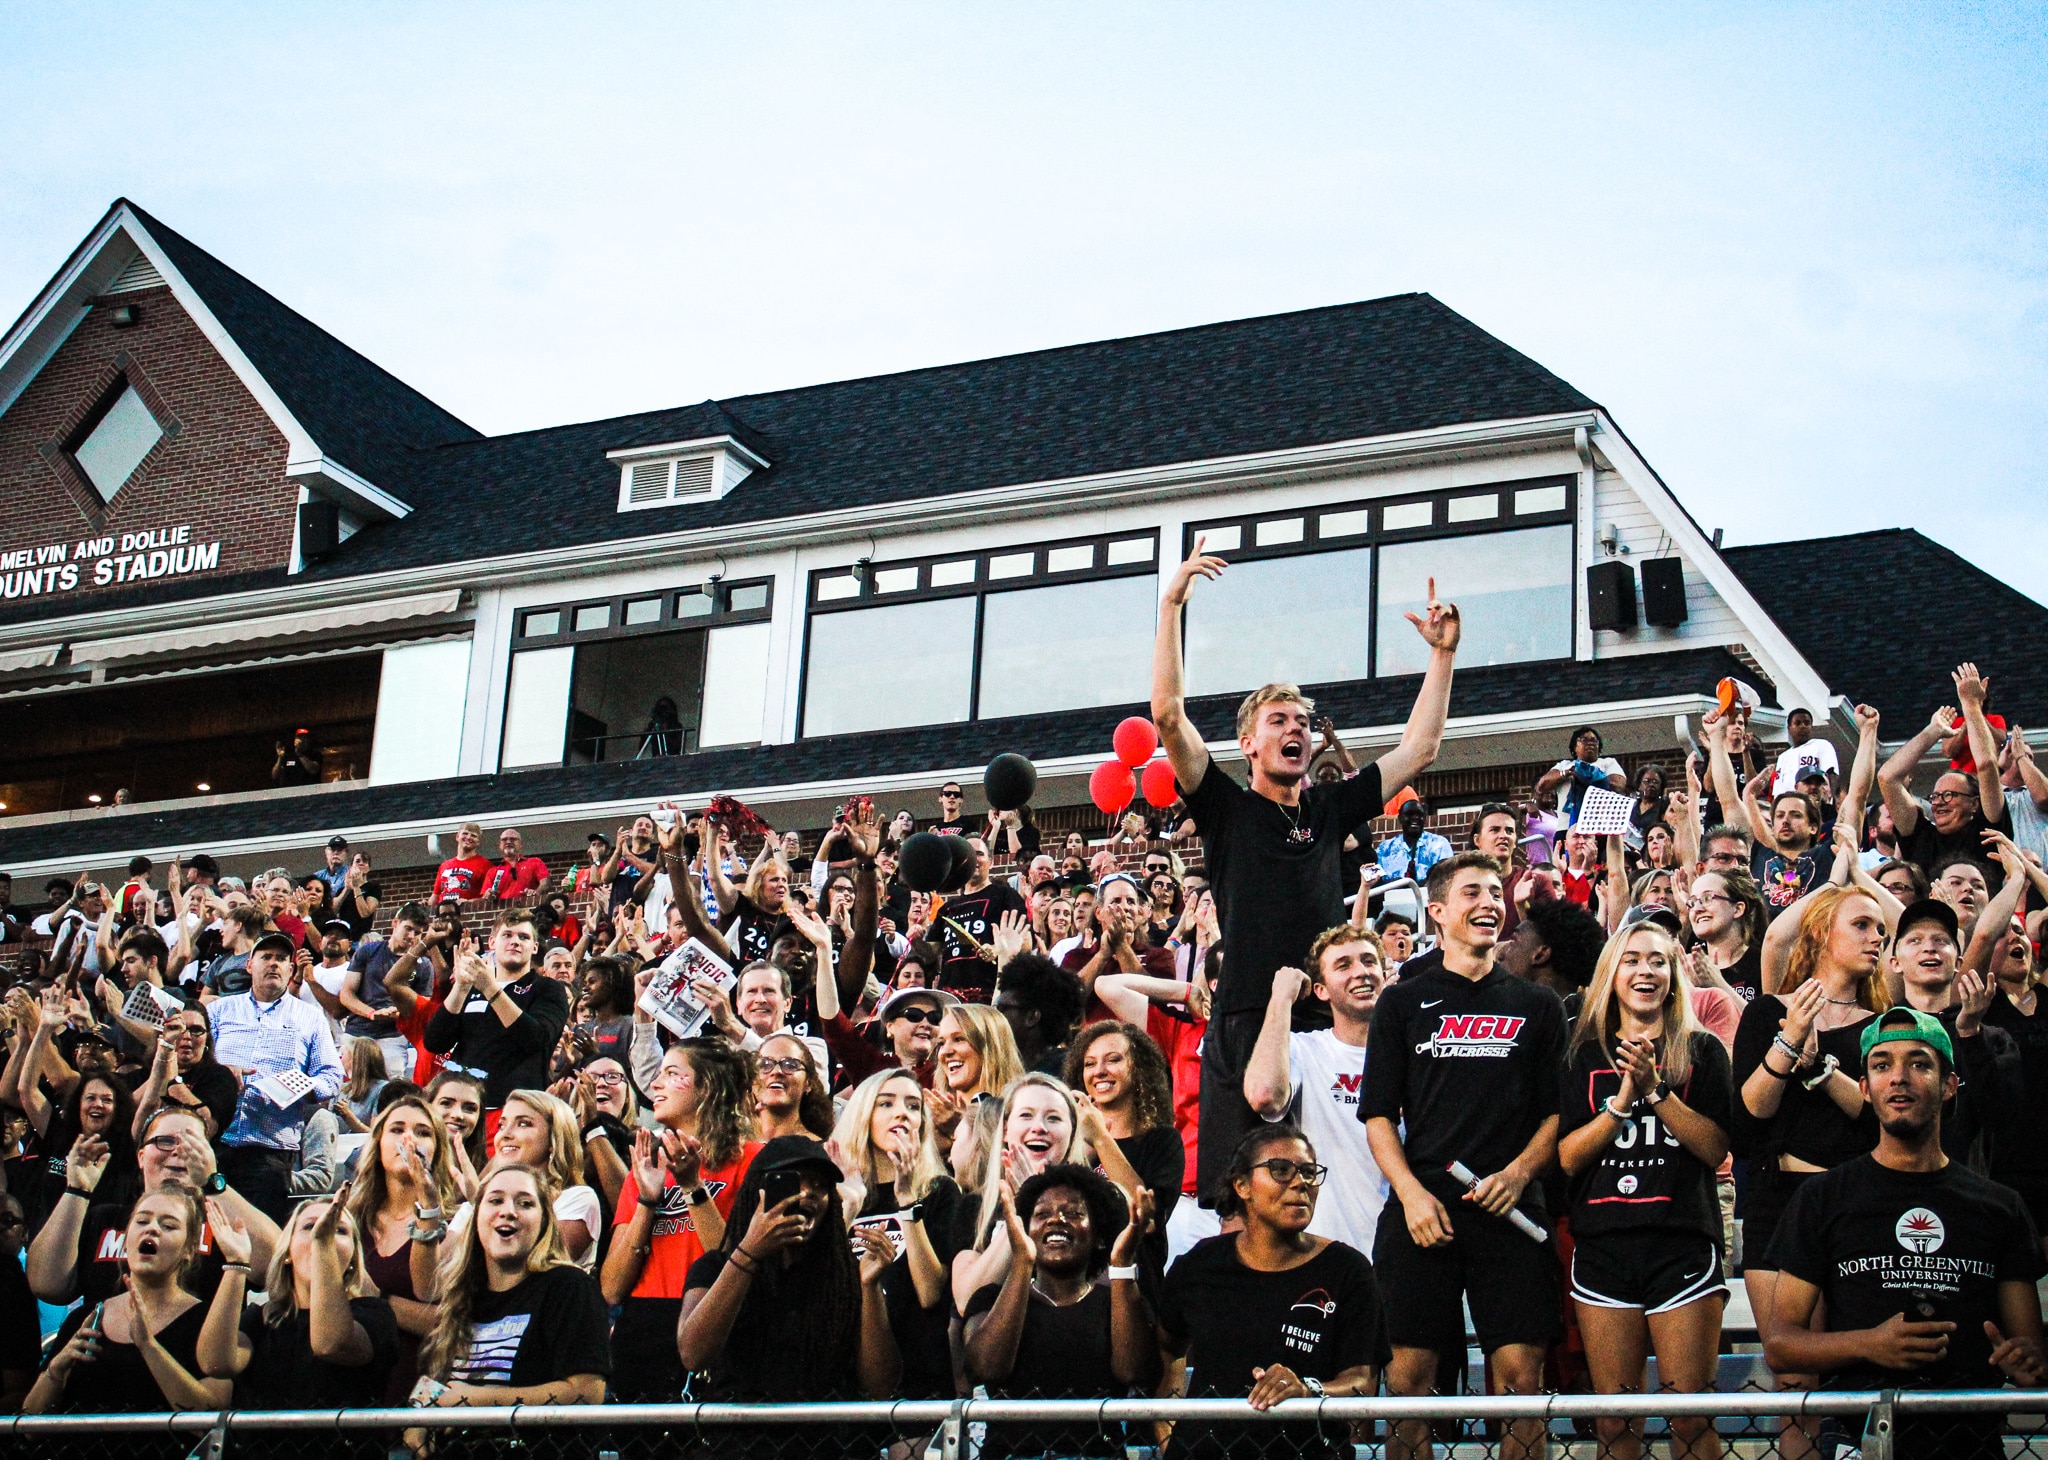 The student section cheering after a Crusader touchdown.